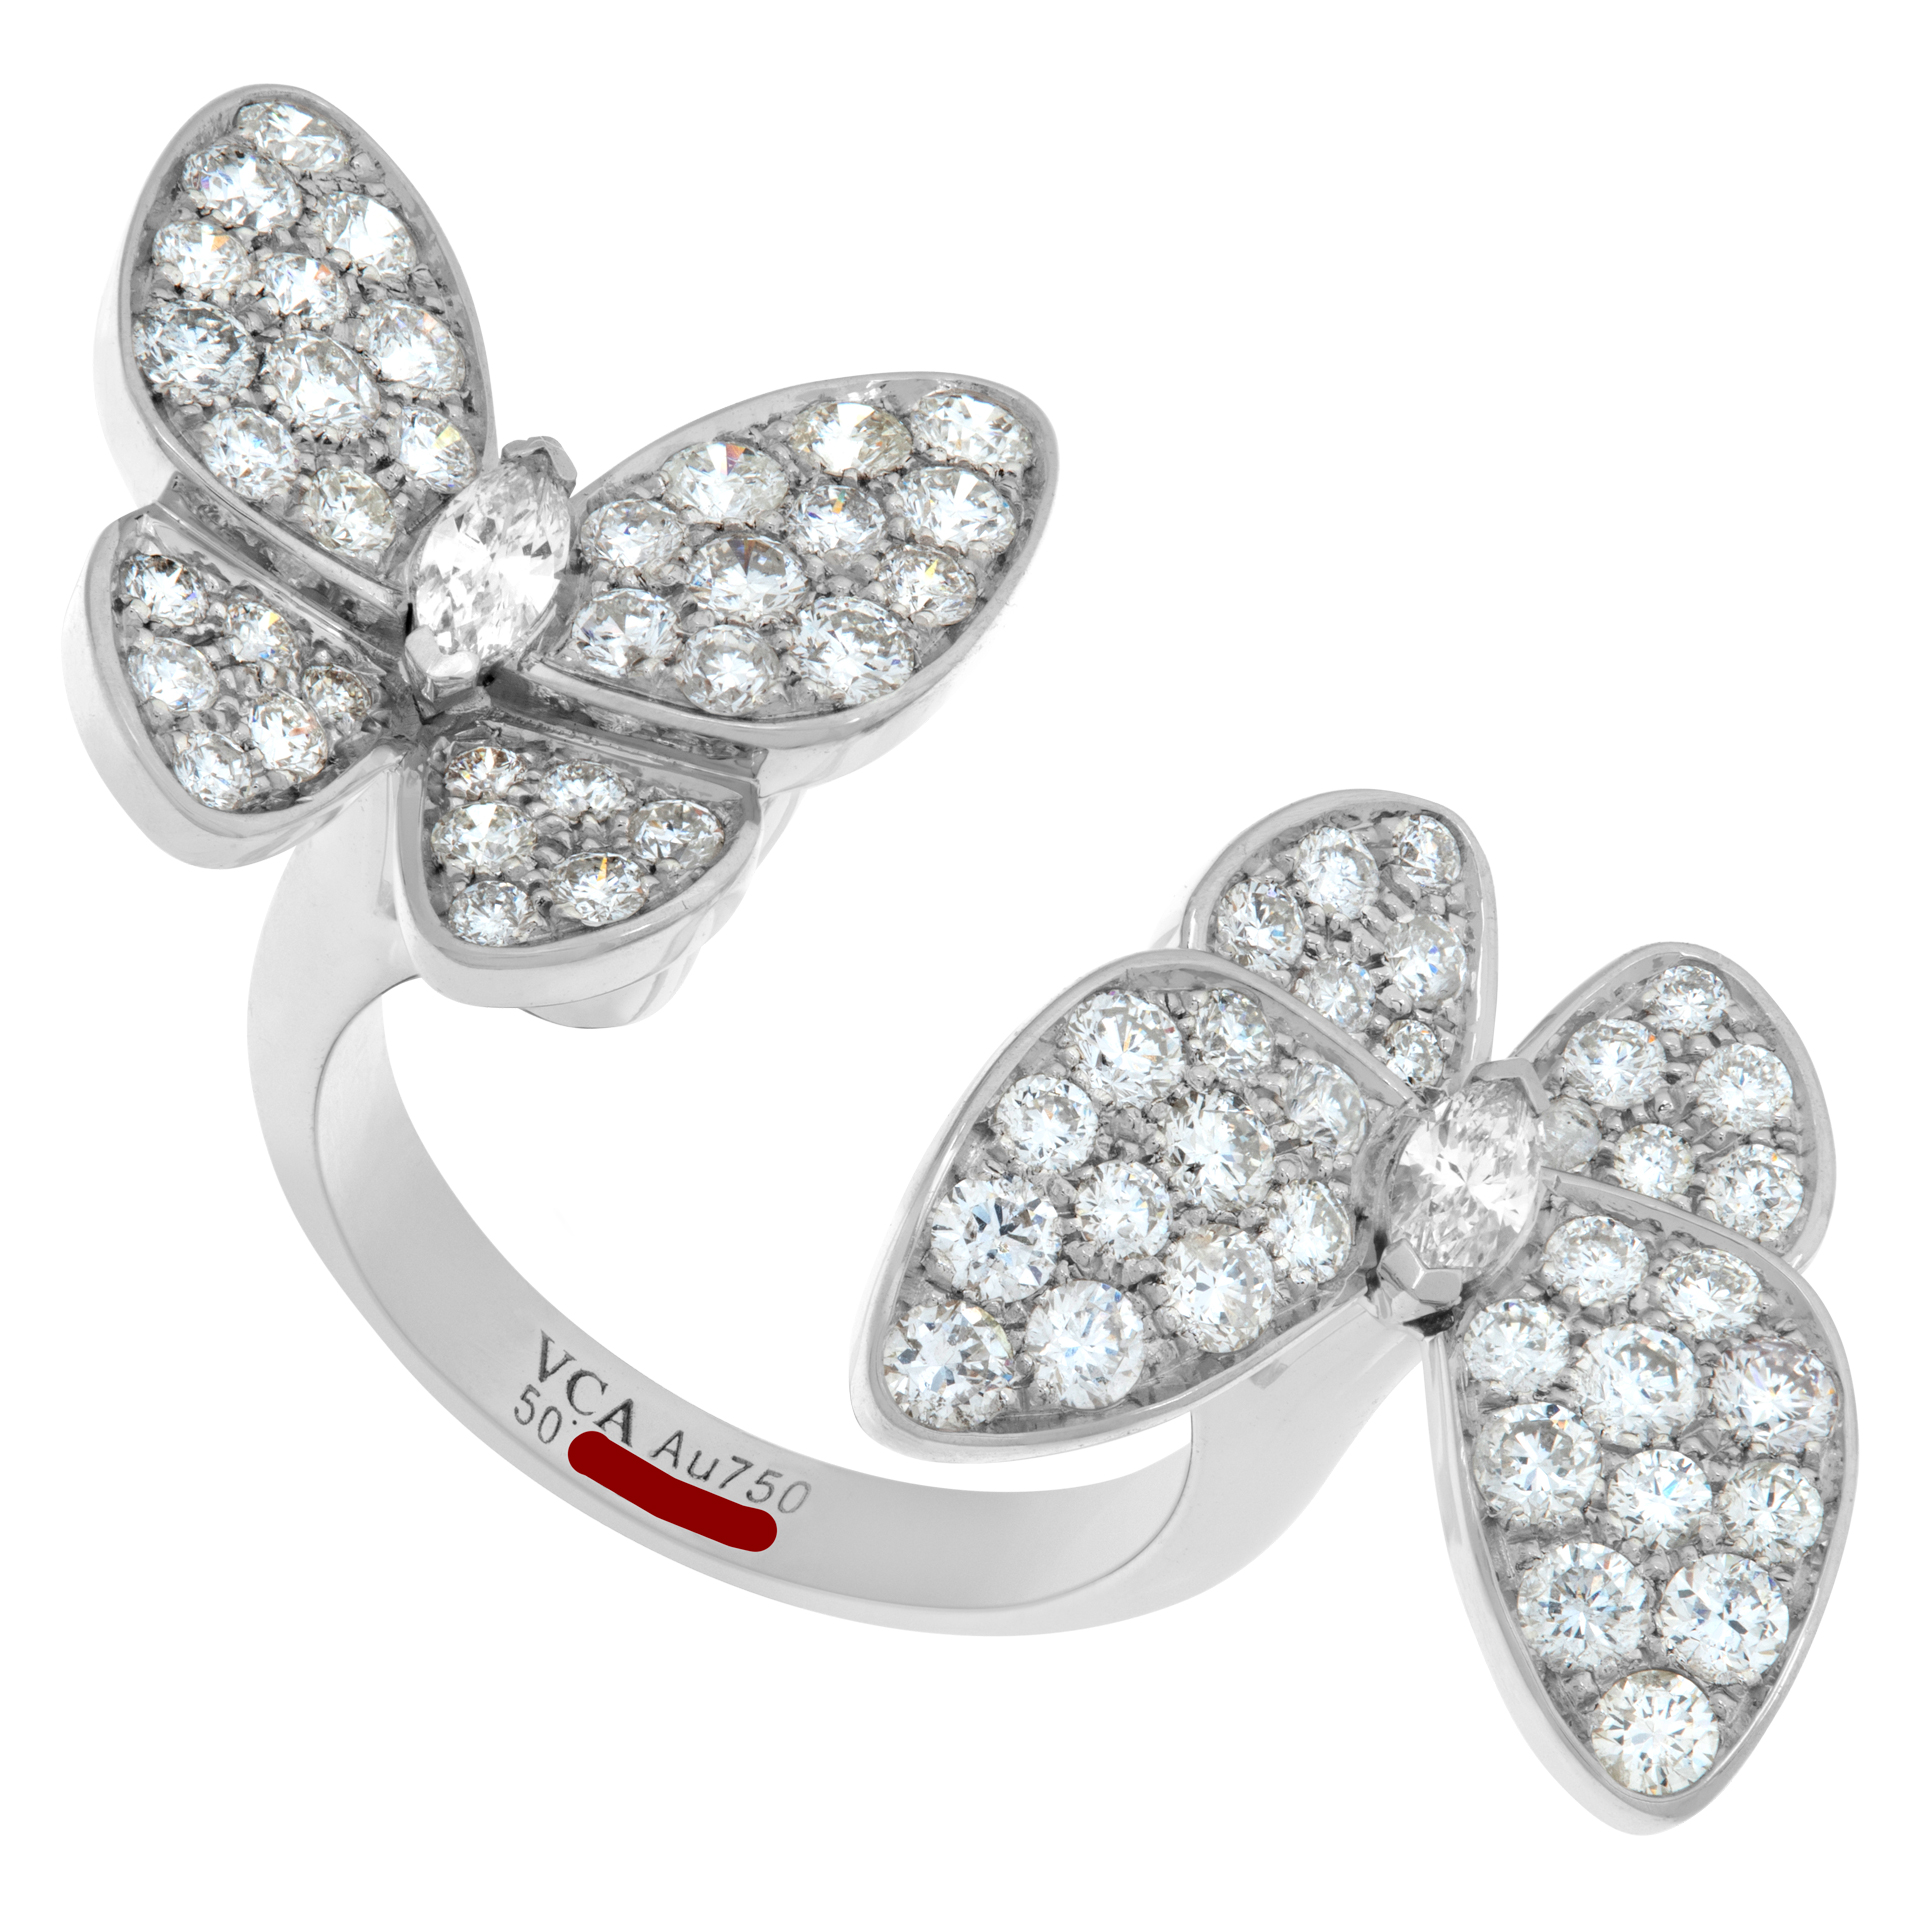 Van Cleef & Arpels Two Butterfly ring in 18k white gold with diamonds size 50 EUR